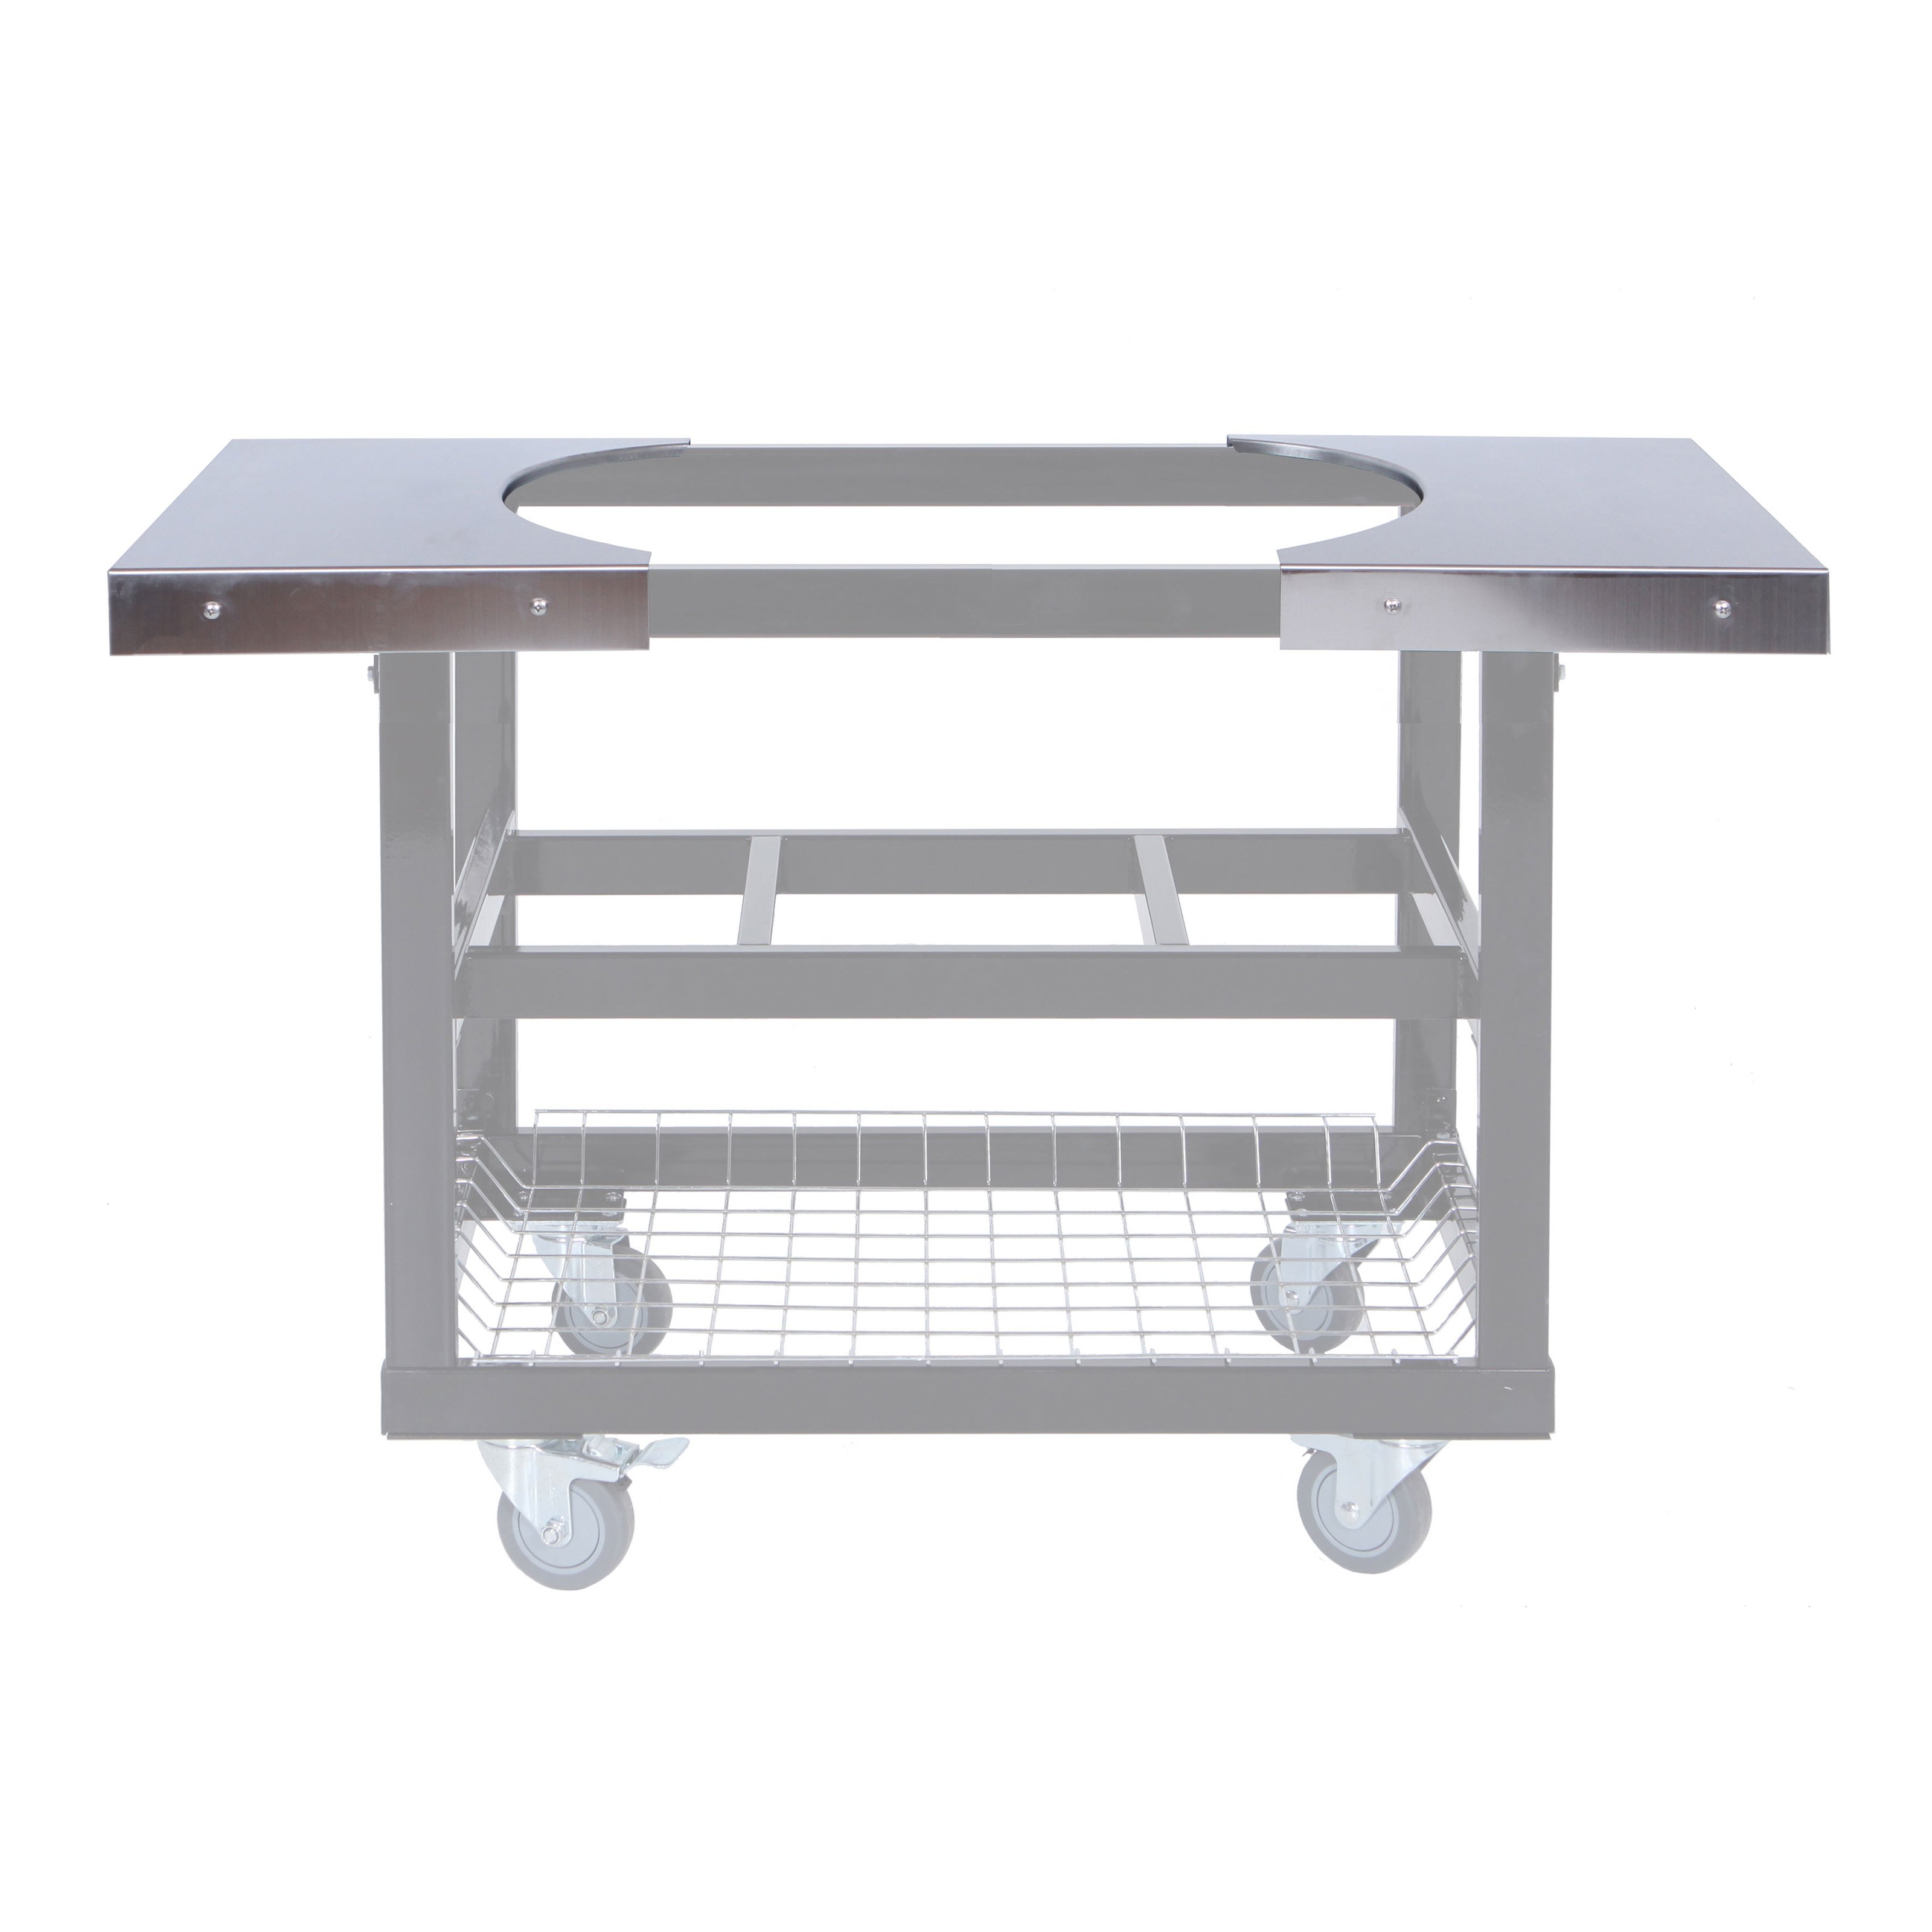 Primo Stainless Steel Cart Side Shelves, Oval LG 300/Oval XL 400 - image 1 of 1